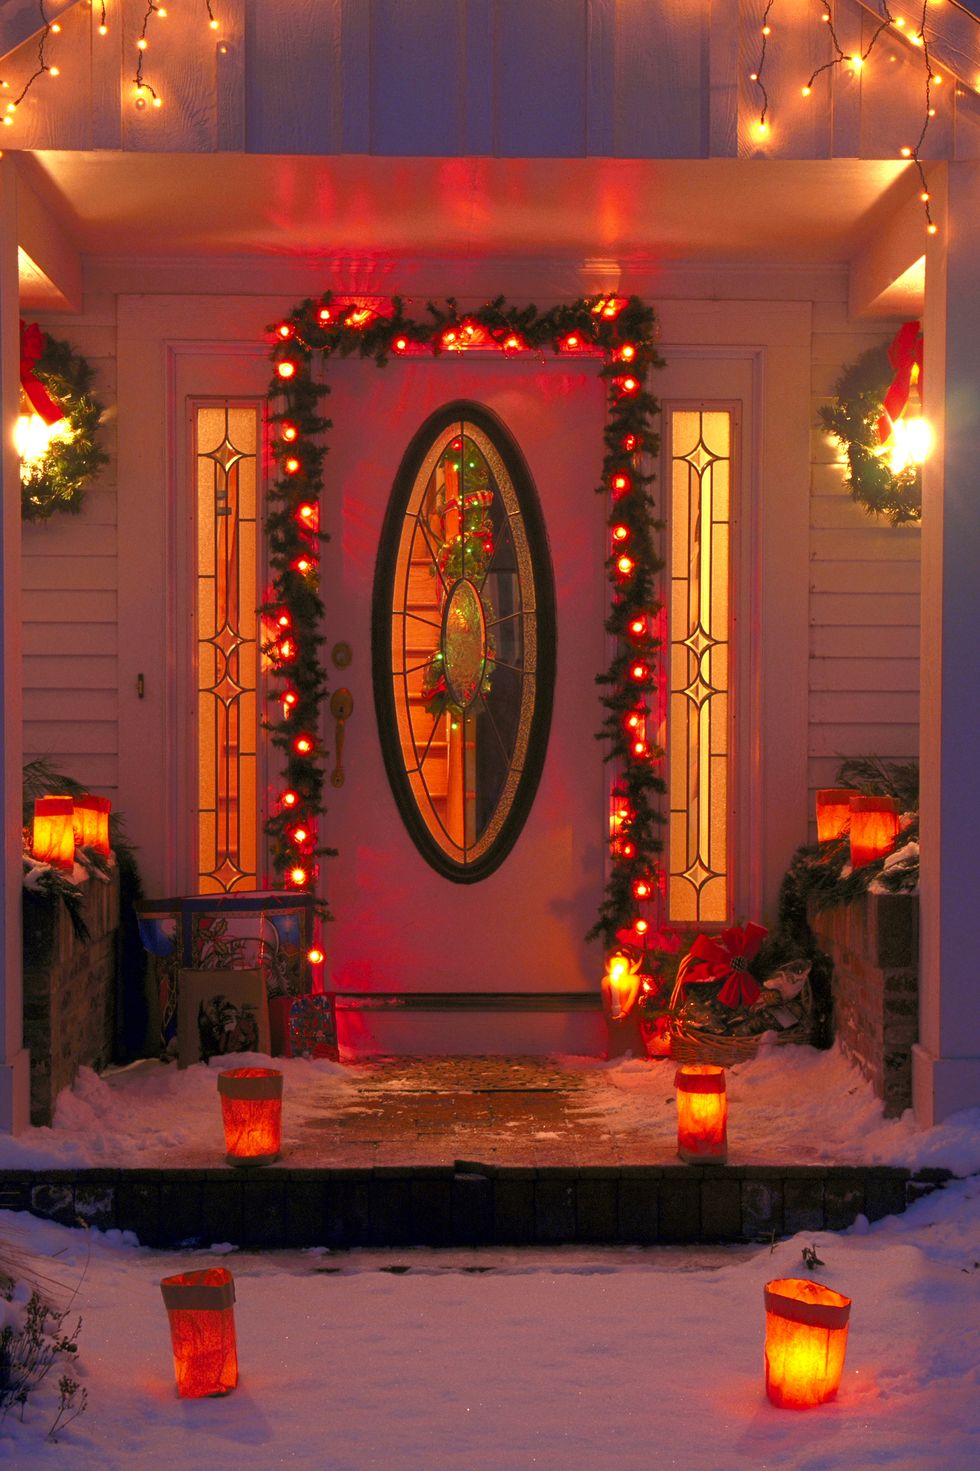 https://hips.hearstapps.com/hmg-prod/images/front-door-holiday-lights-royalty-free-image-1692033825.jpg?crop=1xw:0.99296xh;center,top&resize=980:*